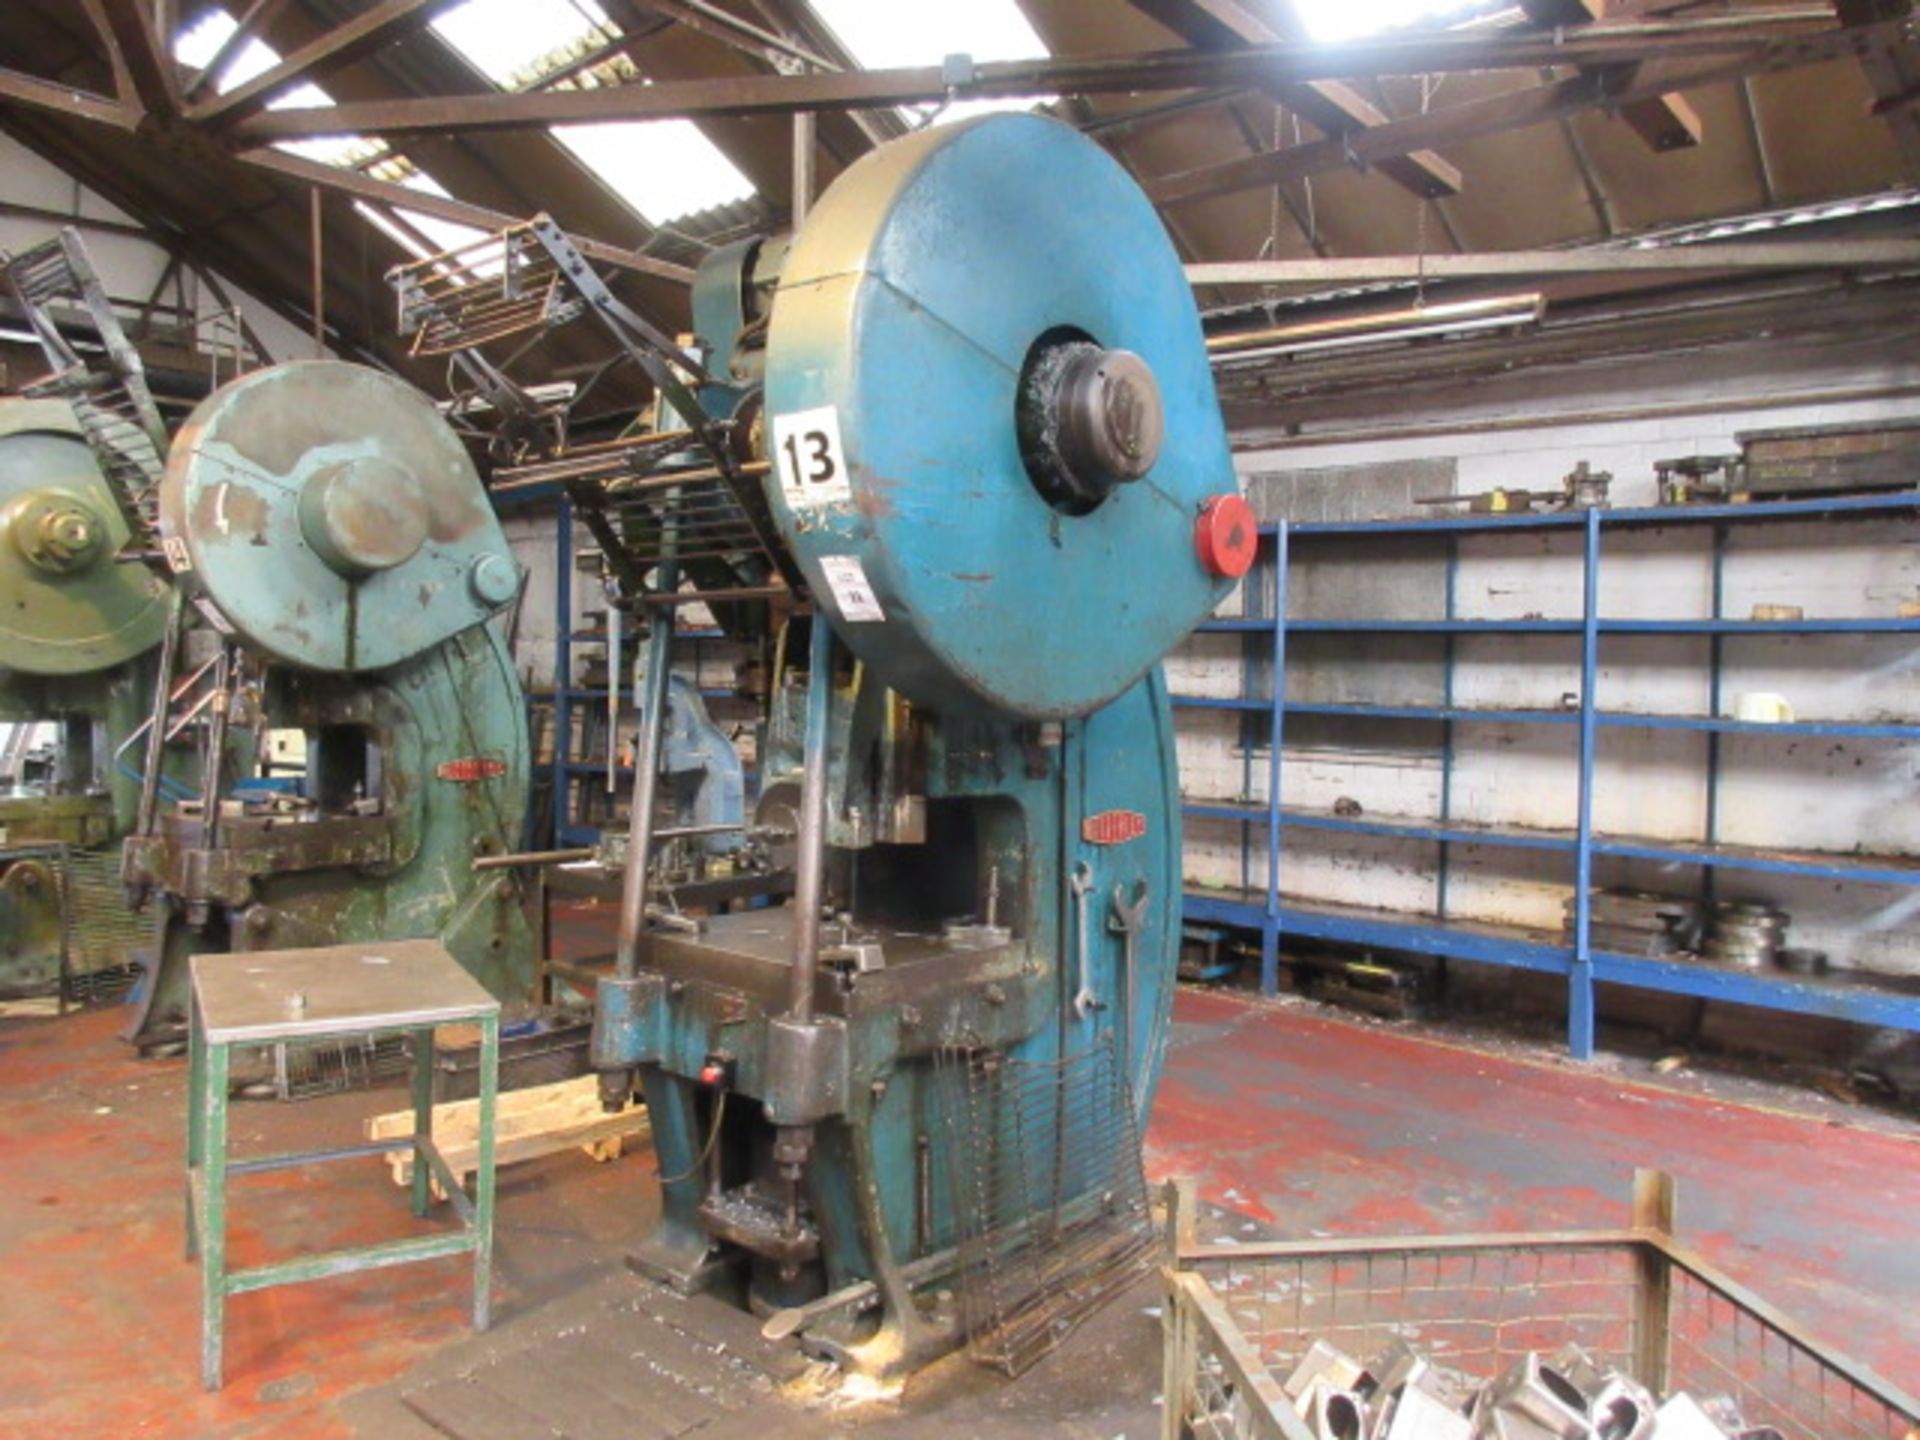 Butterley 100t static geared power press - Image 2 of 6